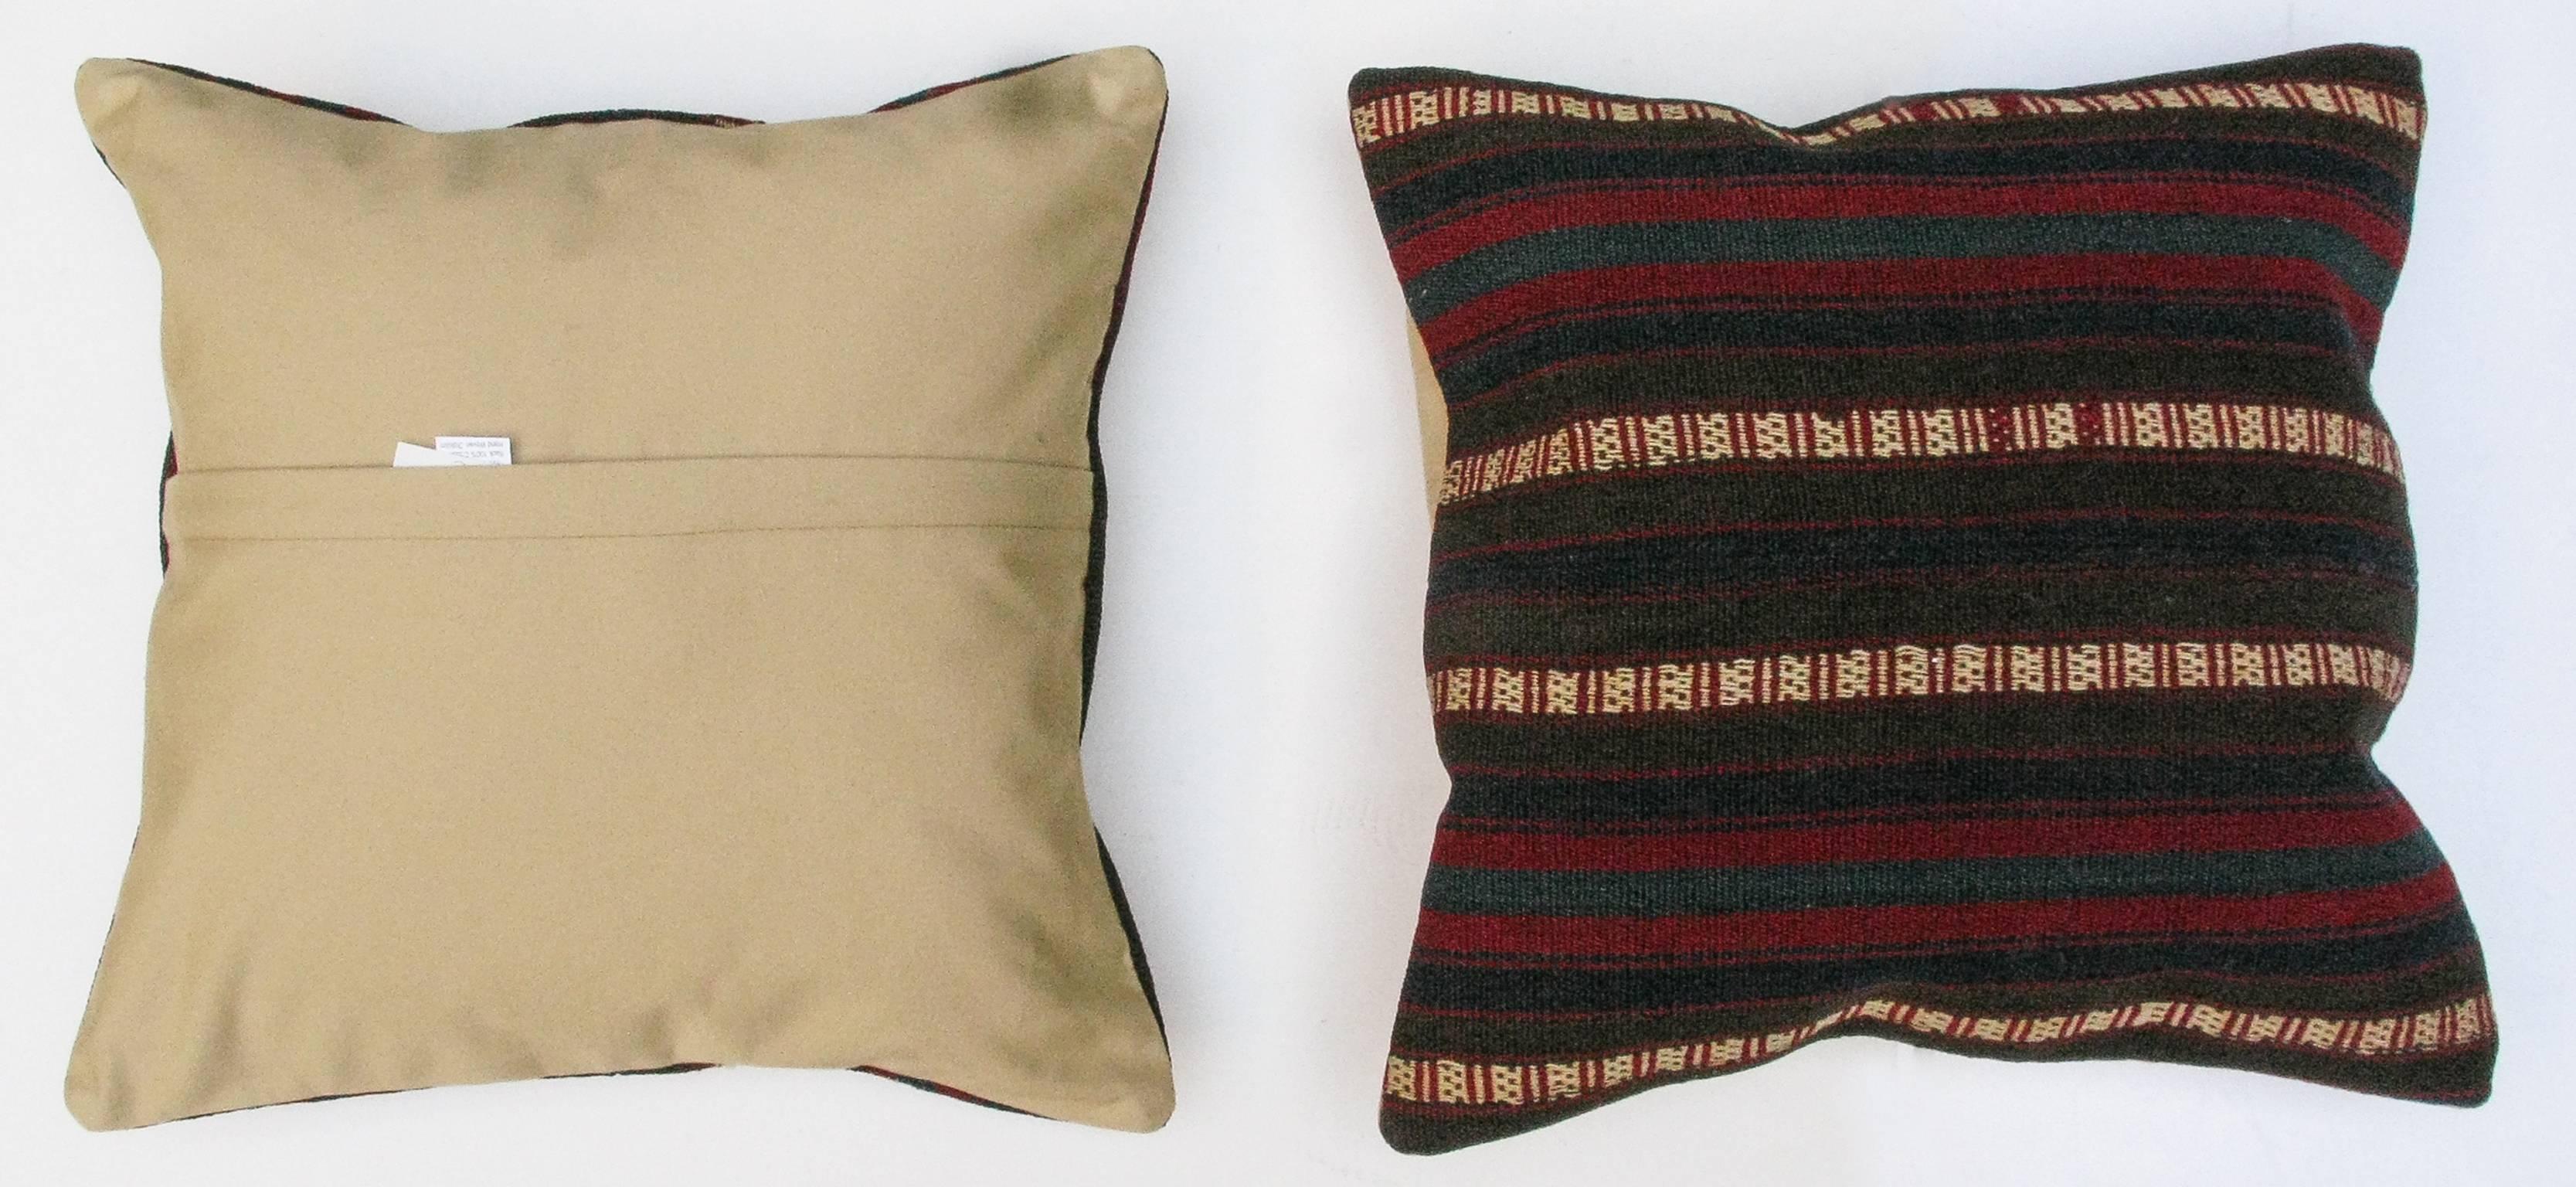 Hand-Woven Set Antique Pillows Made Out of a 19th Century Turkish Kilim